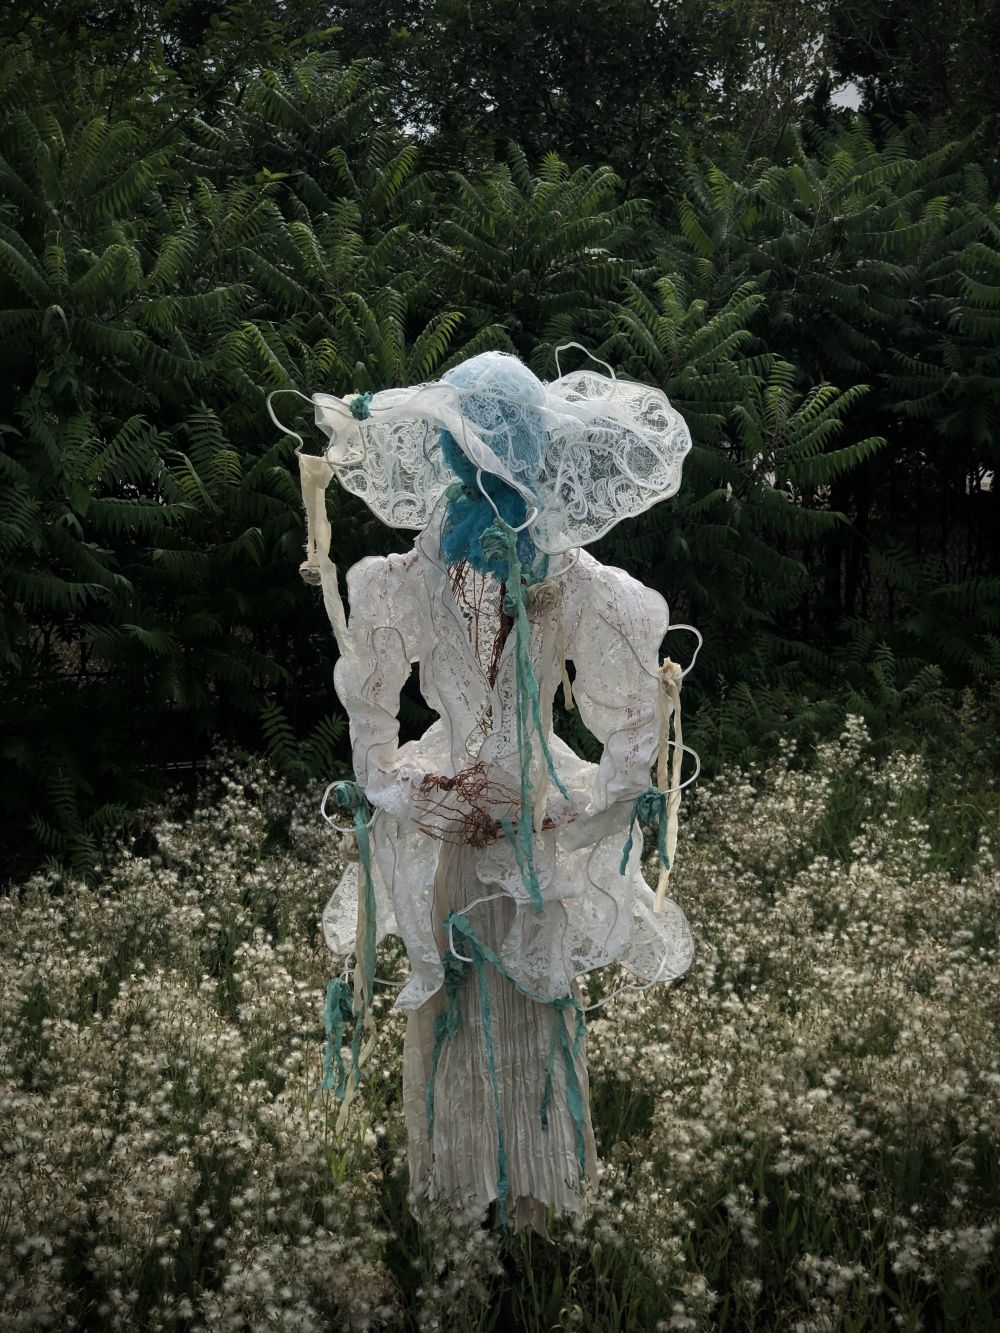 Handcrafted mannequin in meadow dressed in variety of fabrics.